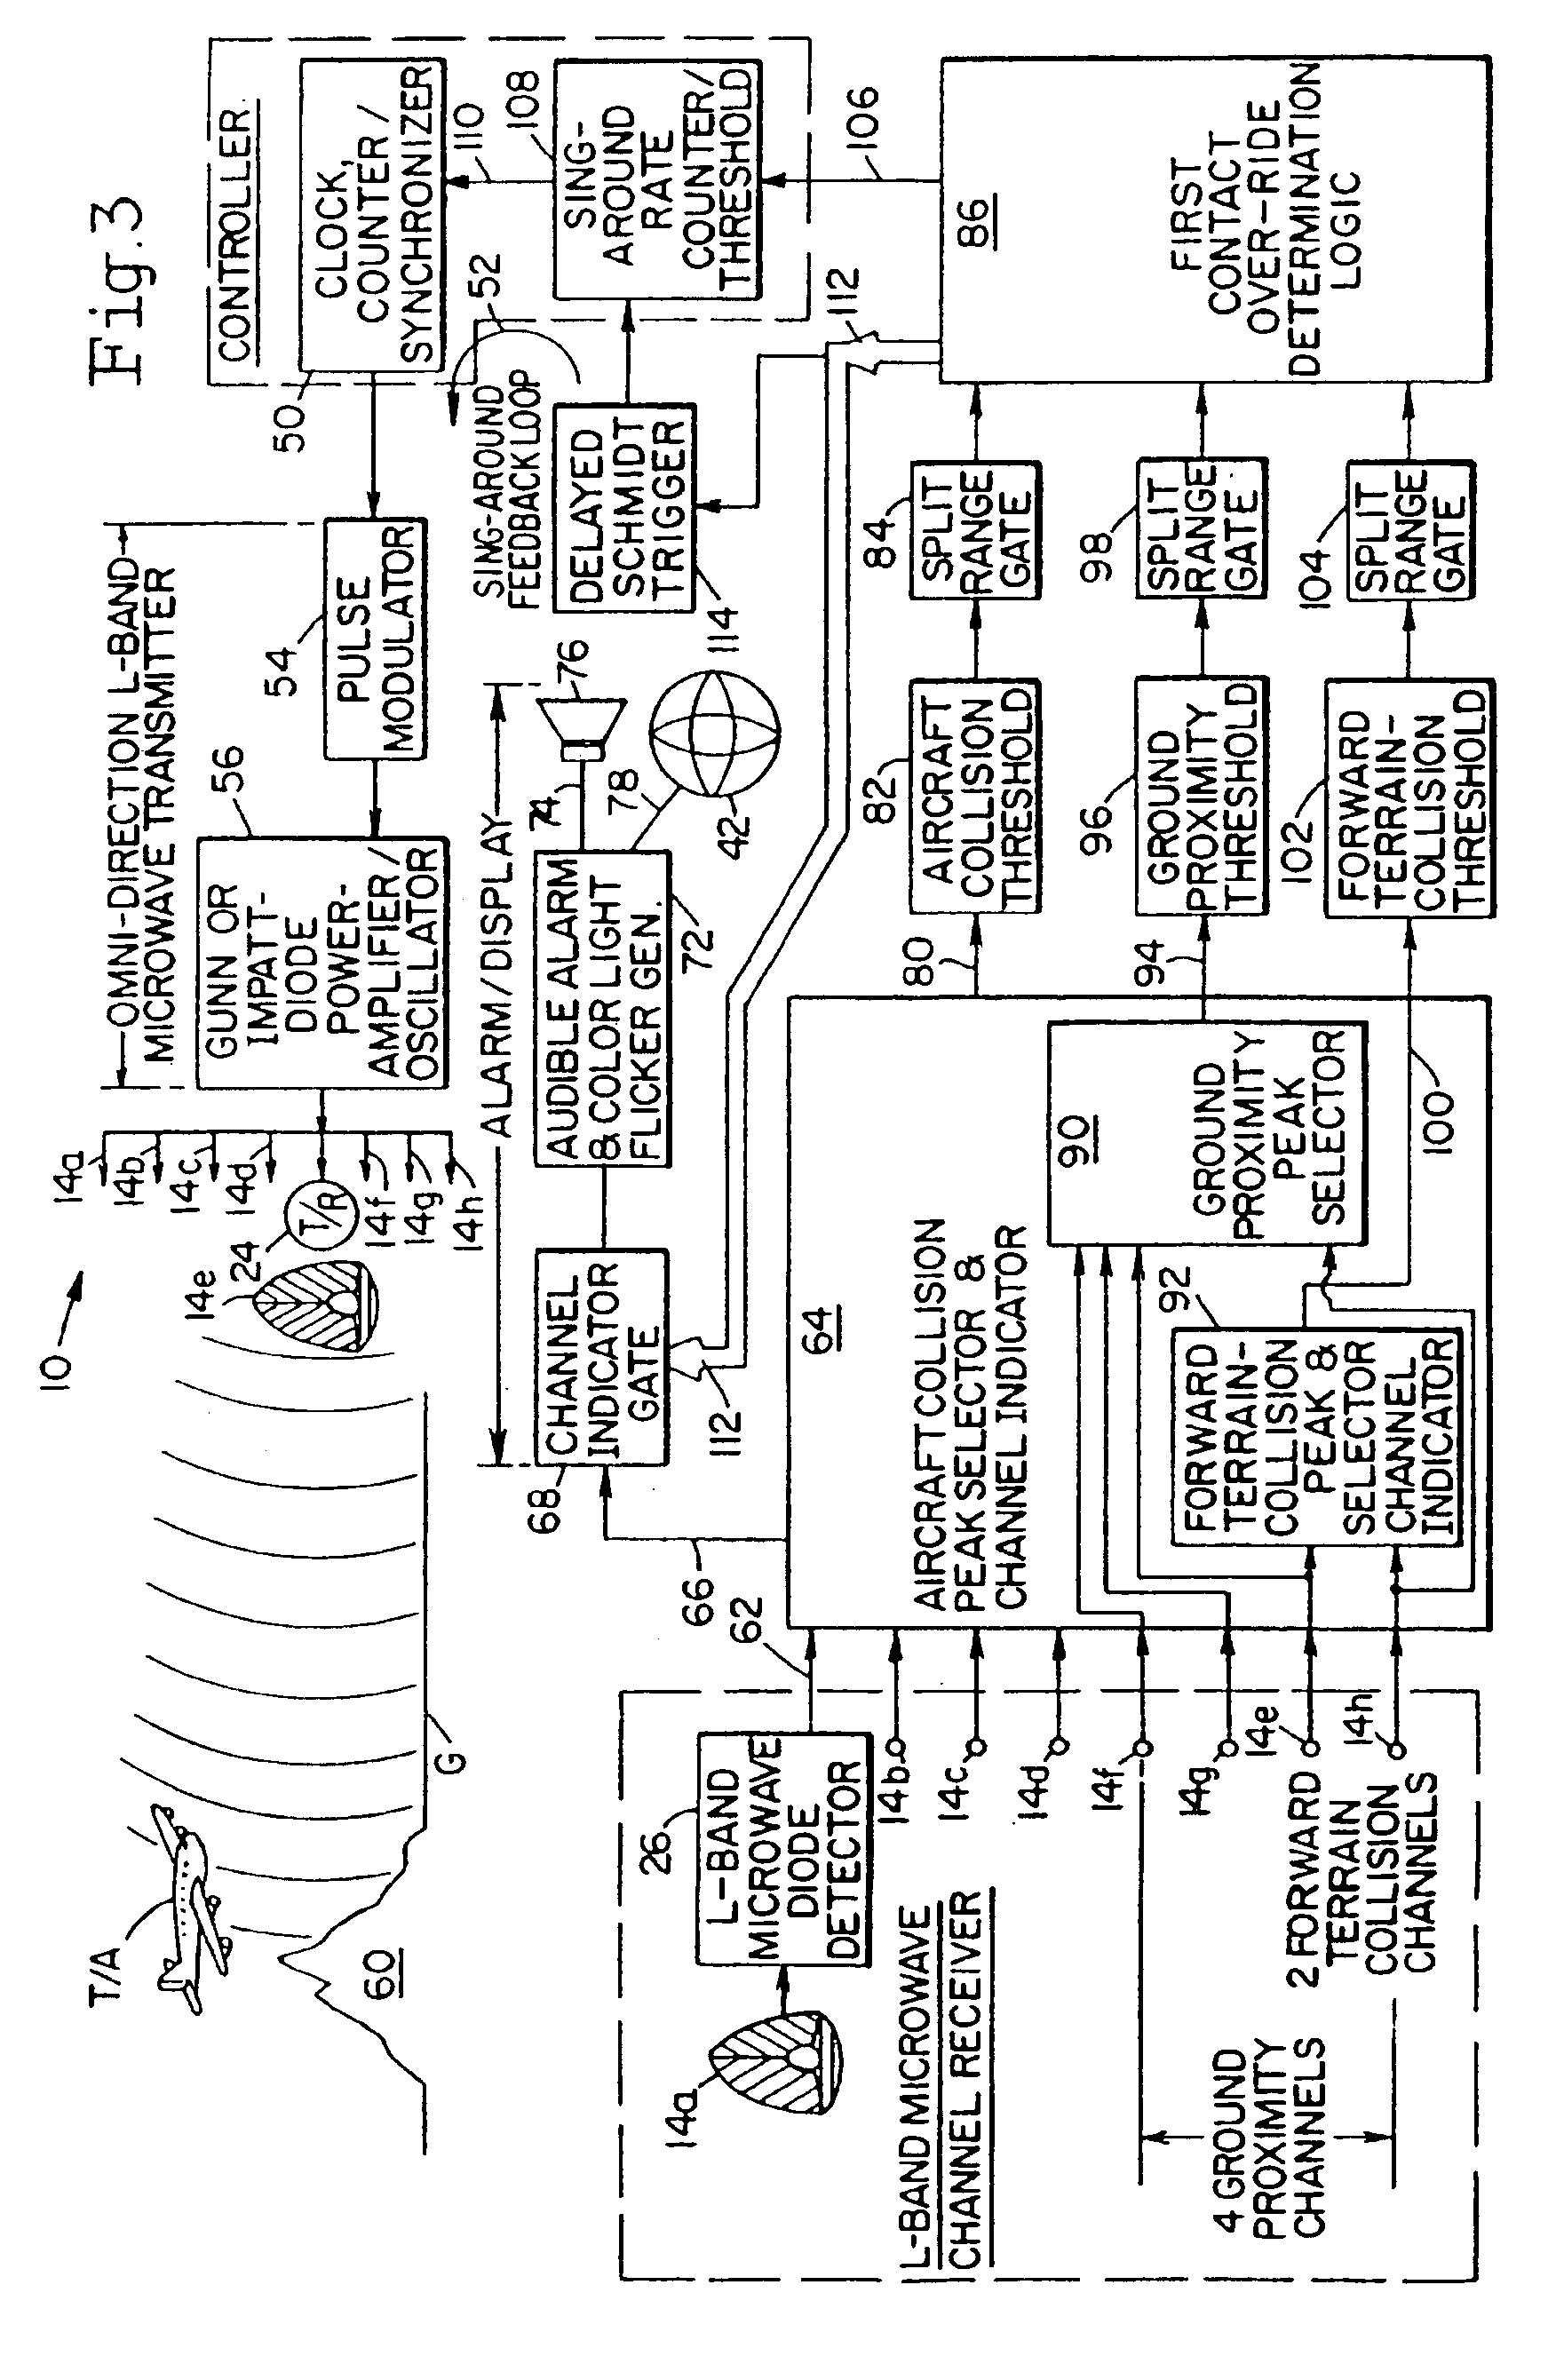 Collision avoidance system for use in aircraft